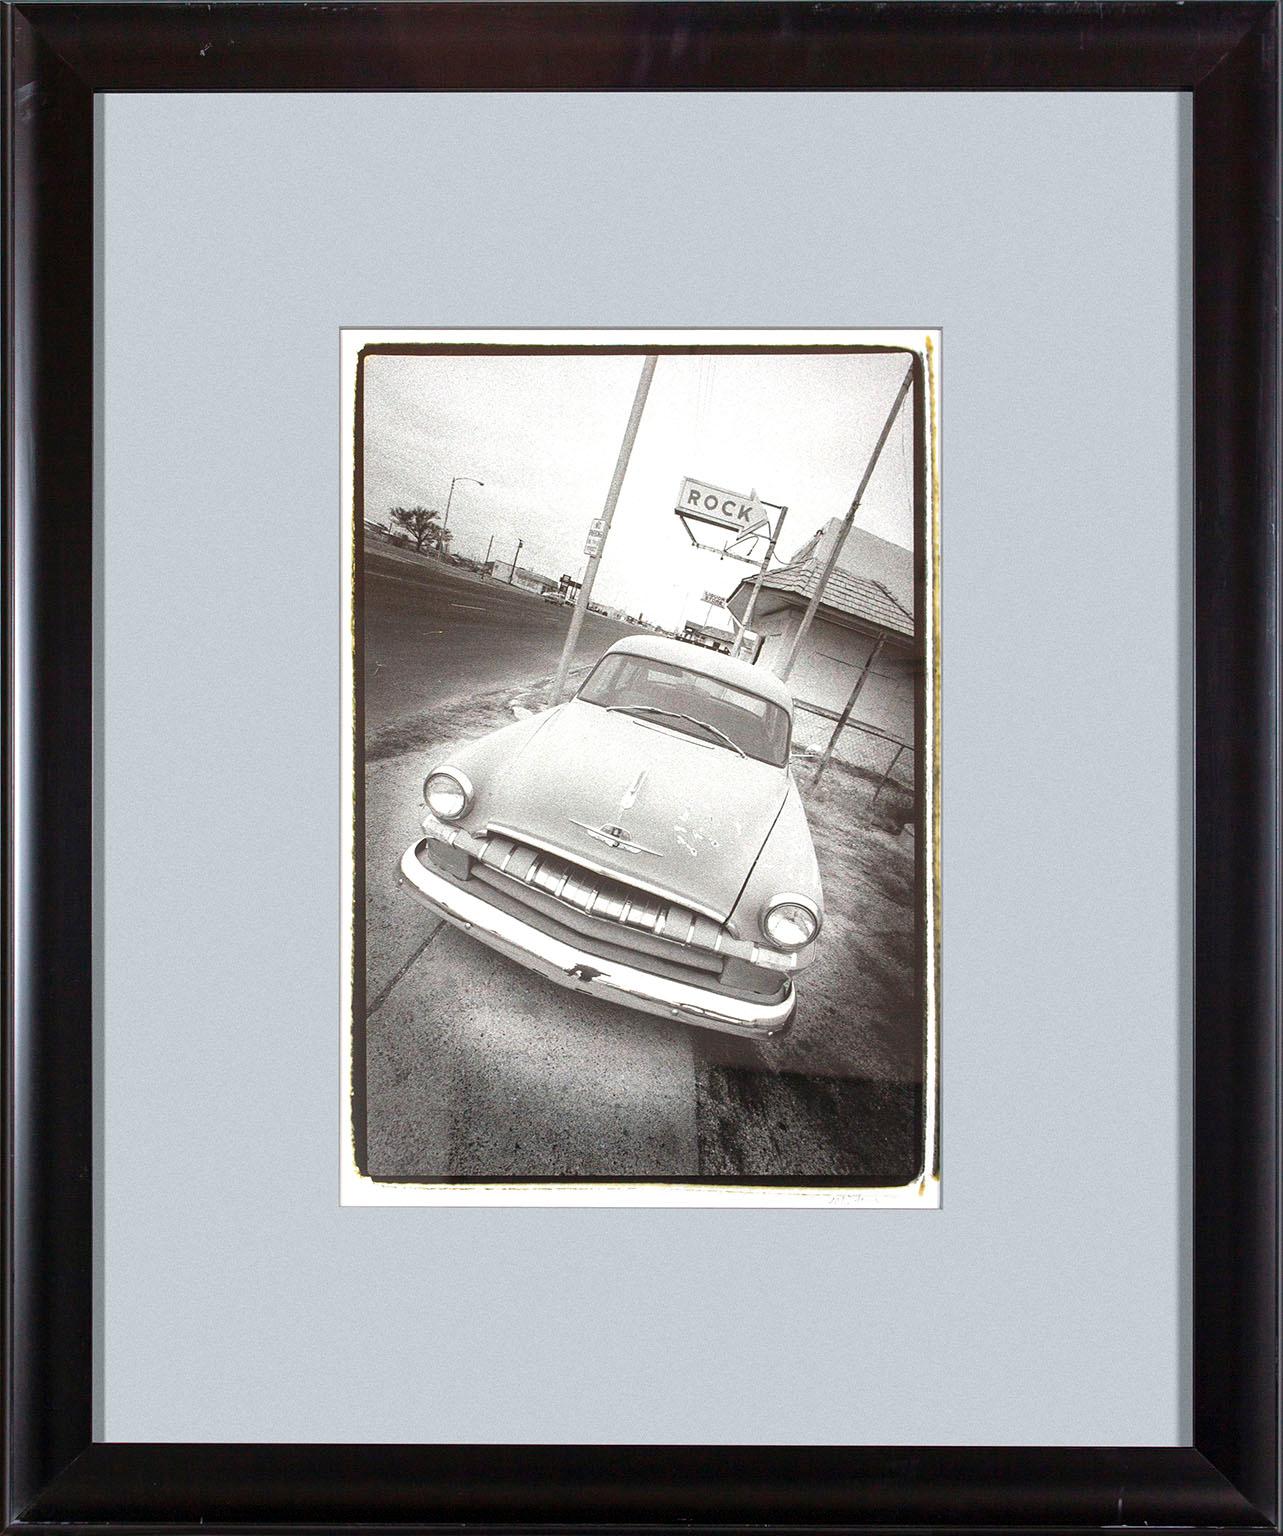 Michael Farr Black and White Photograph - Photo of vintage car outside of bar from original Hard Rock Hotel and Casino